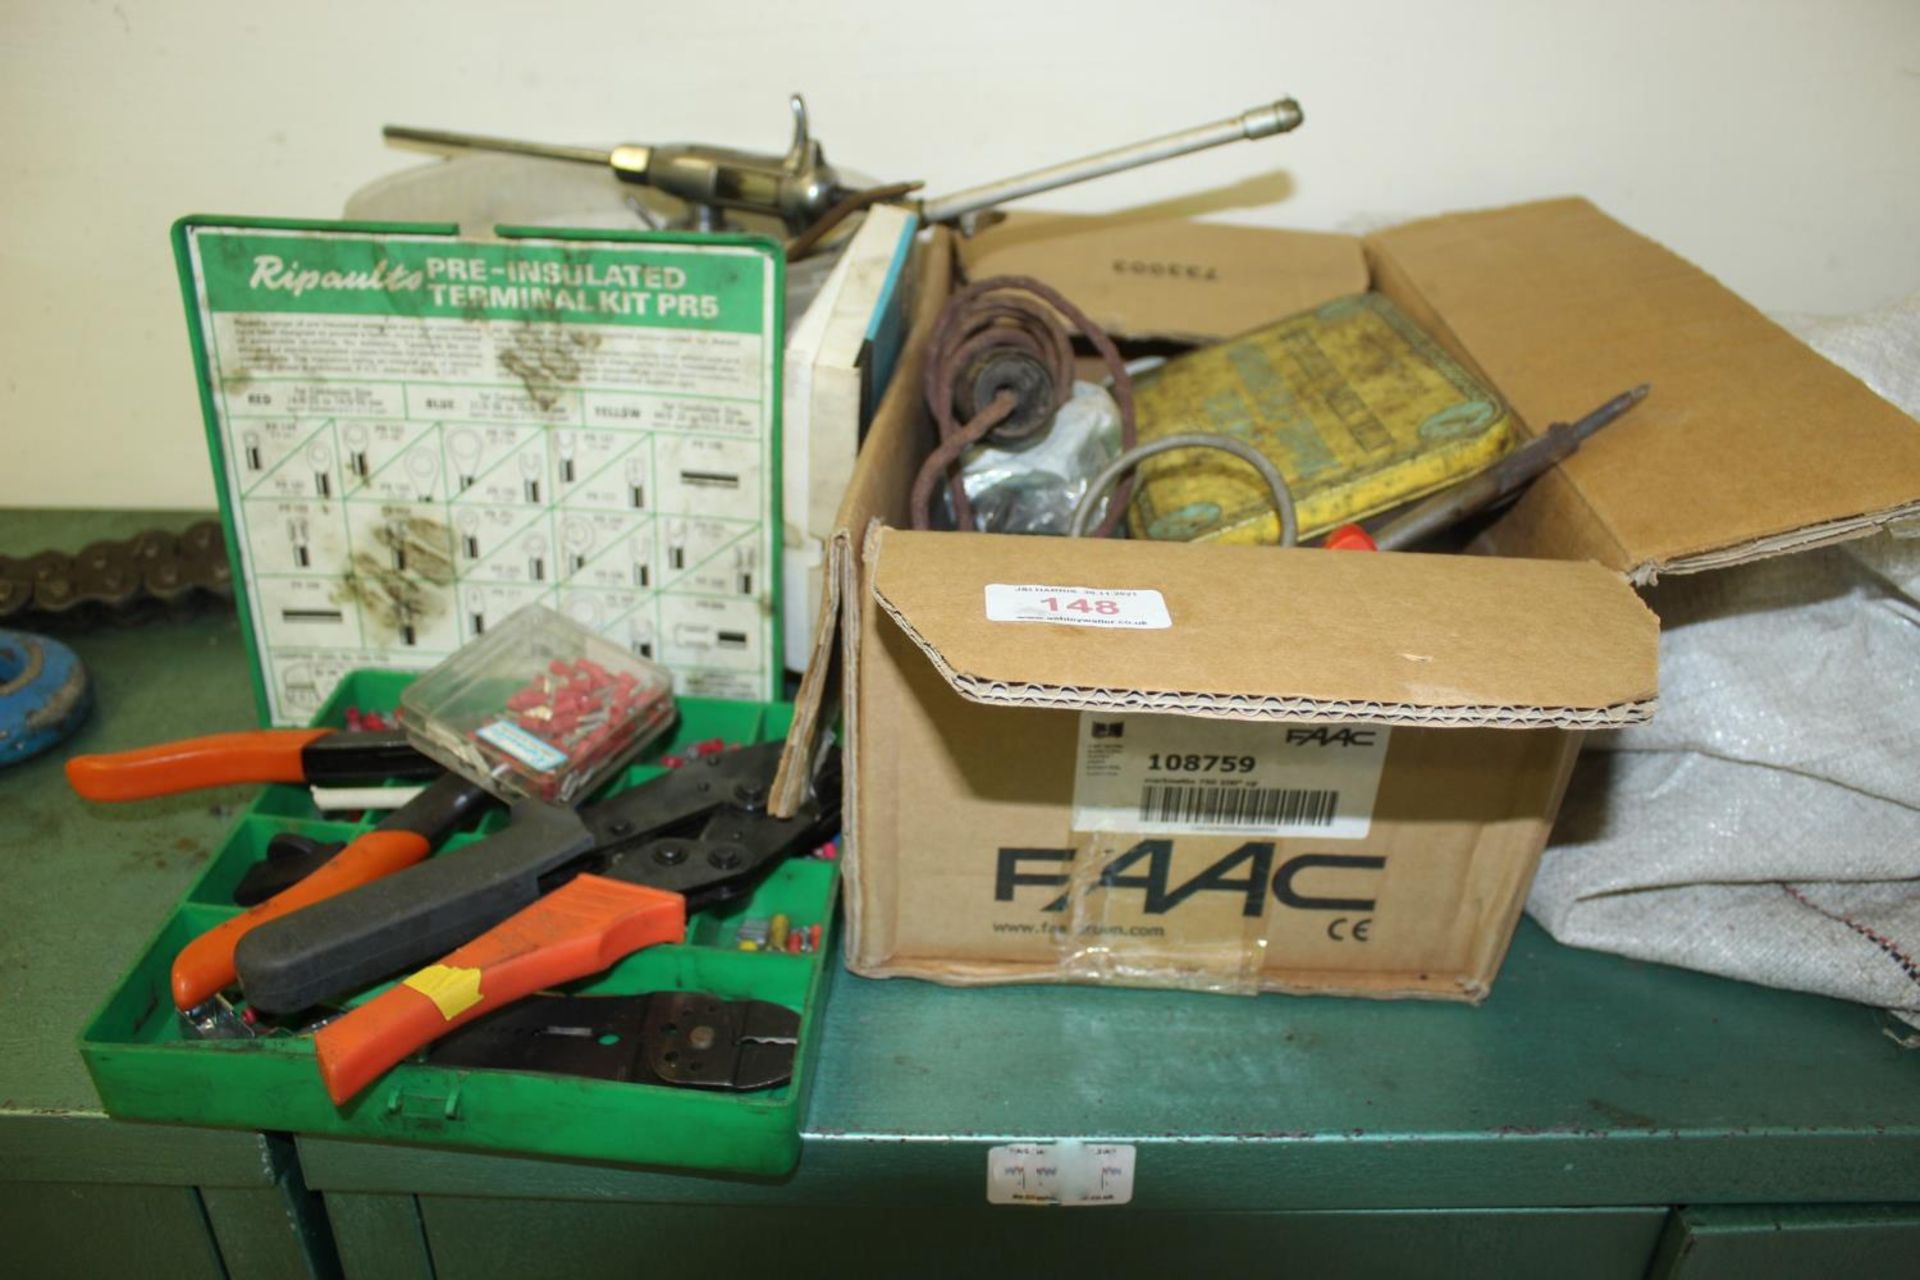 VARIOUS ITEMS TO INCLUDE OIL CANS, TERMINAL KITS, SOLDERING IRONS, NUTS, BOLTS AND THREADED BAR ETC